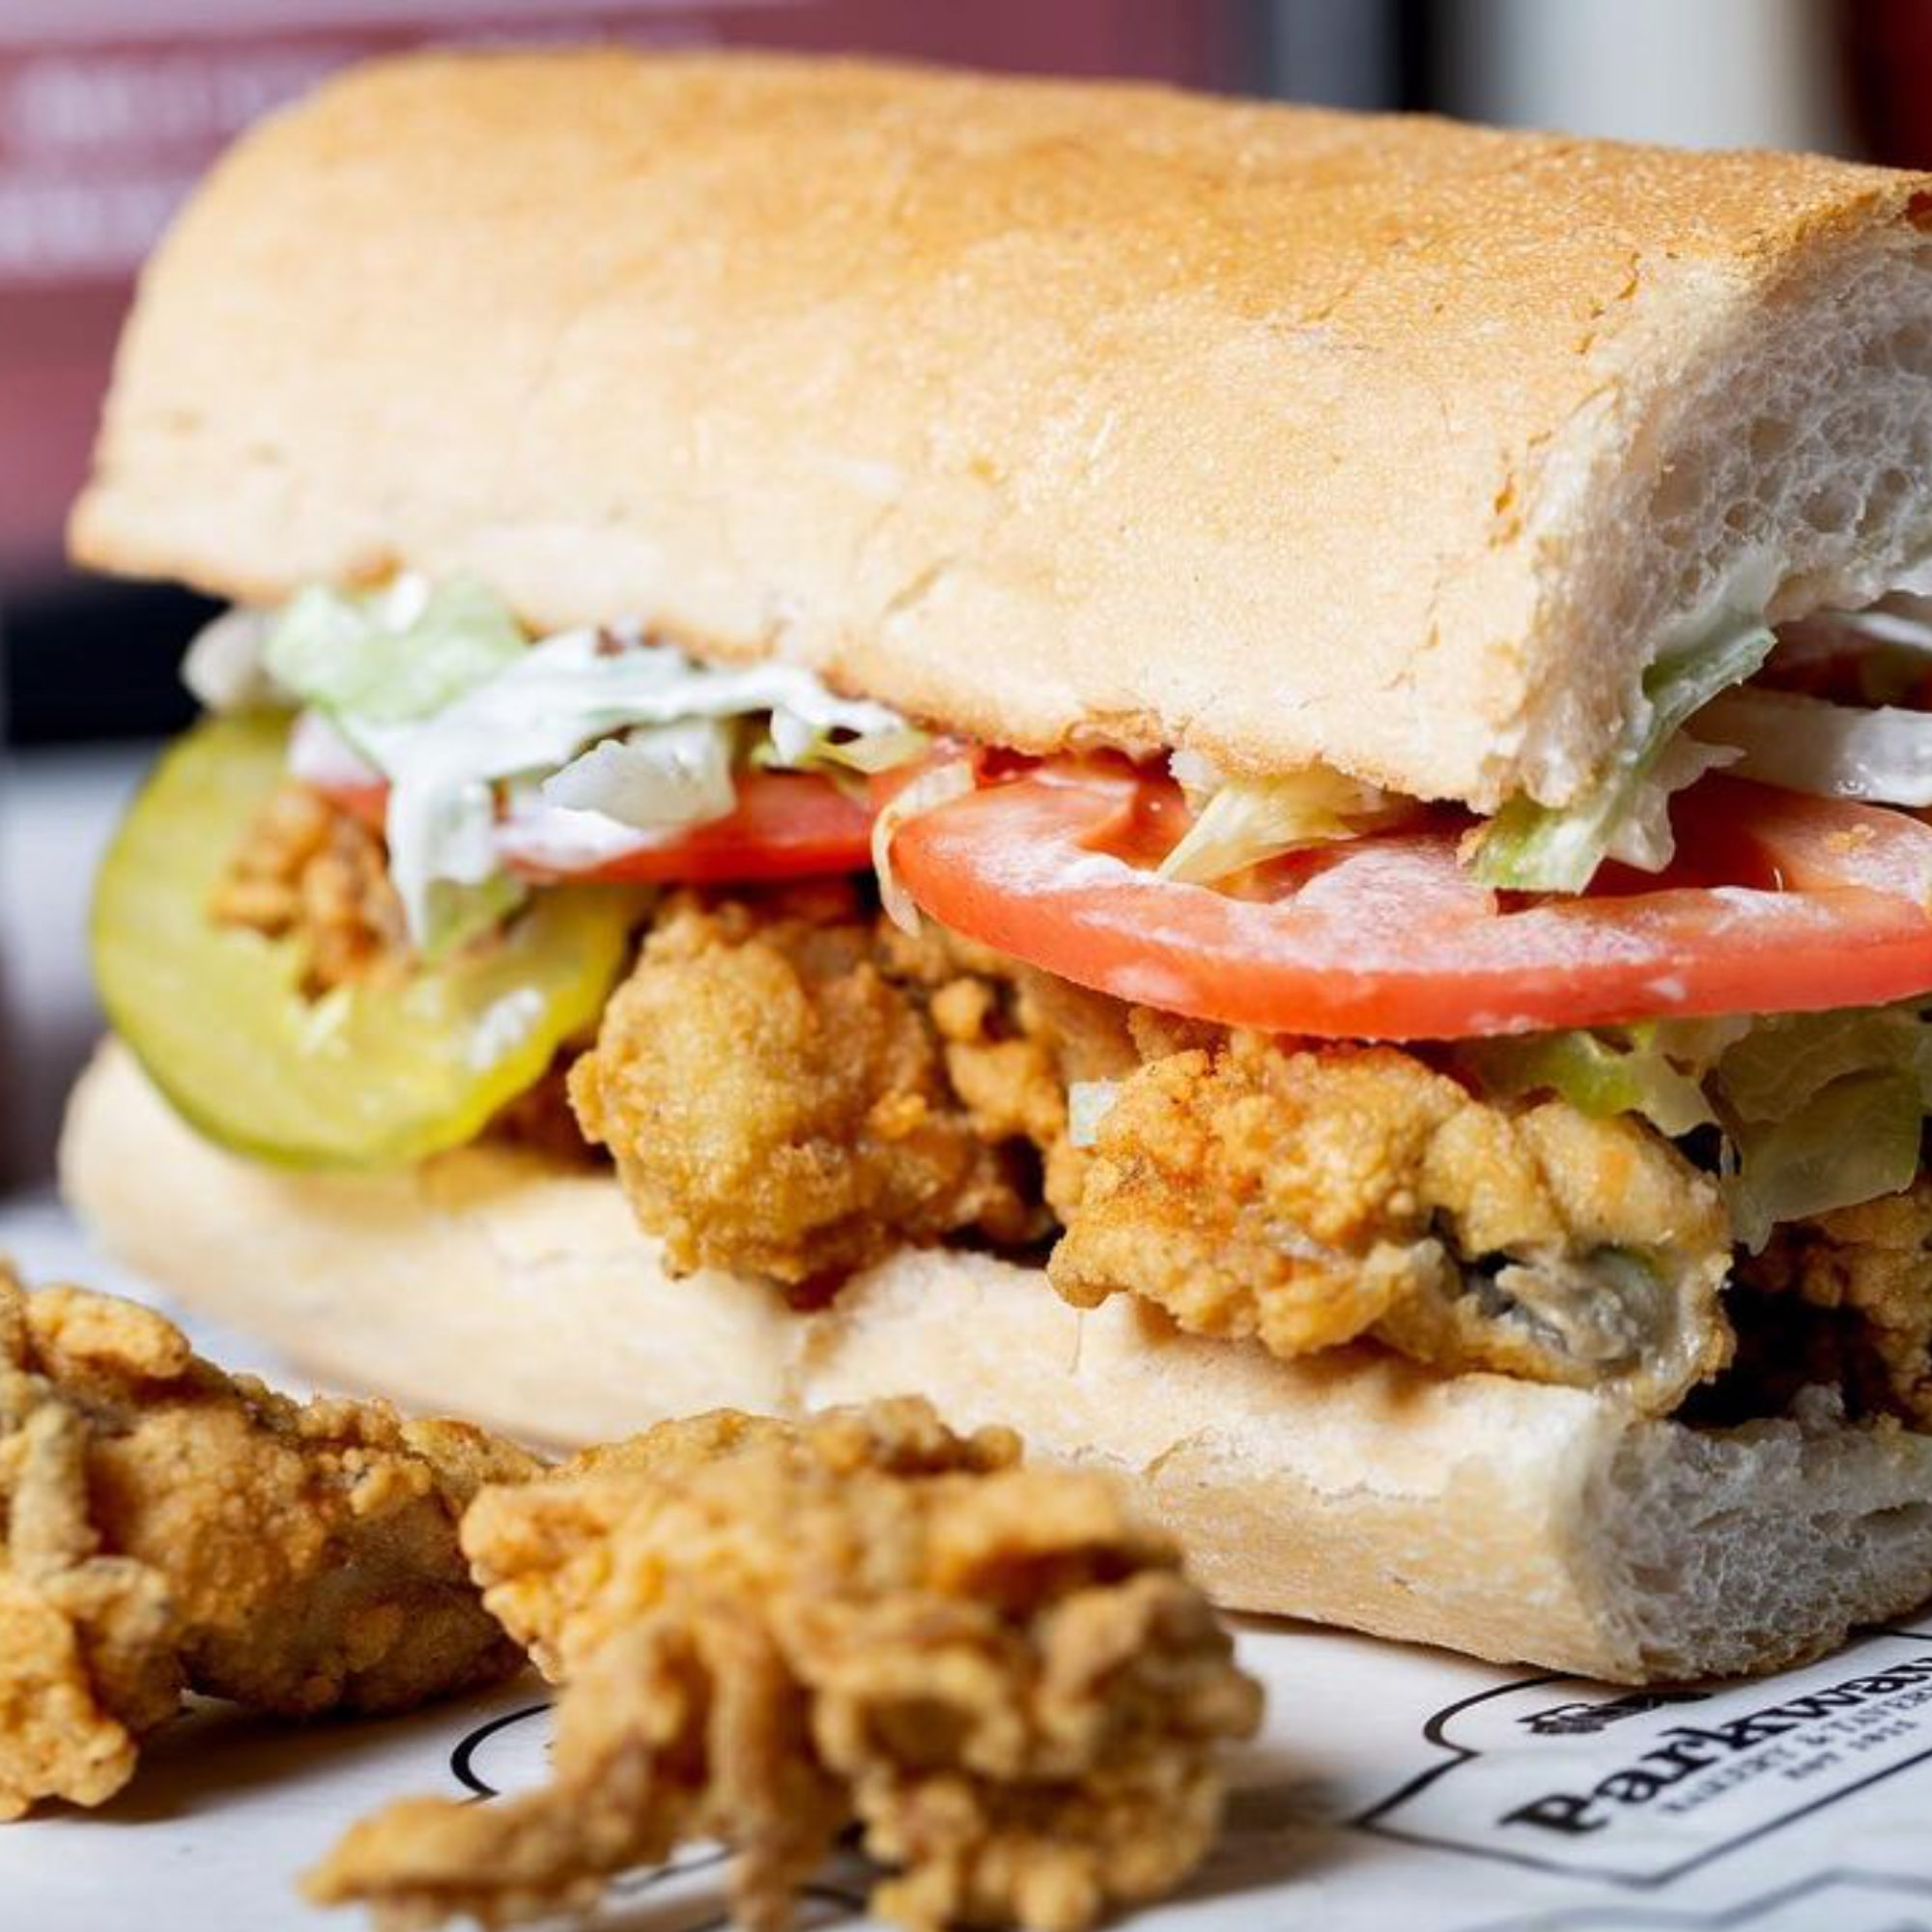 Po-boy sandwich at Parkway in New Orleans